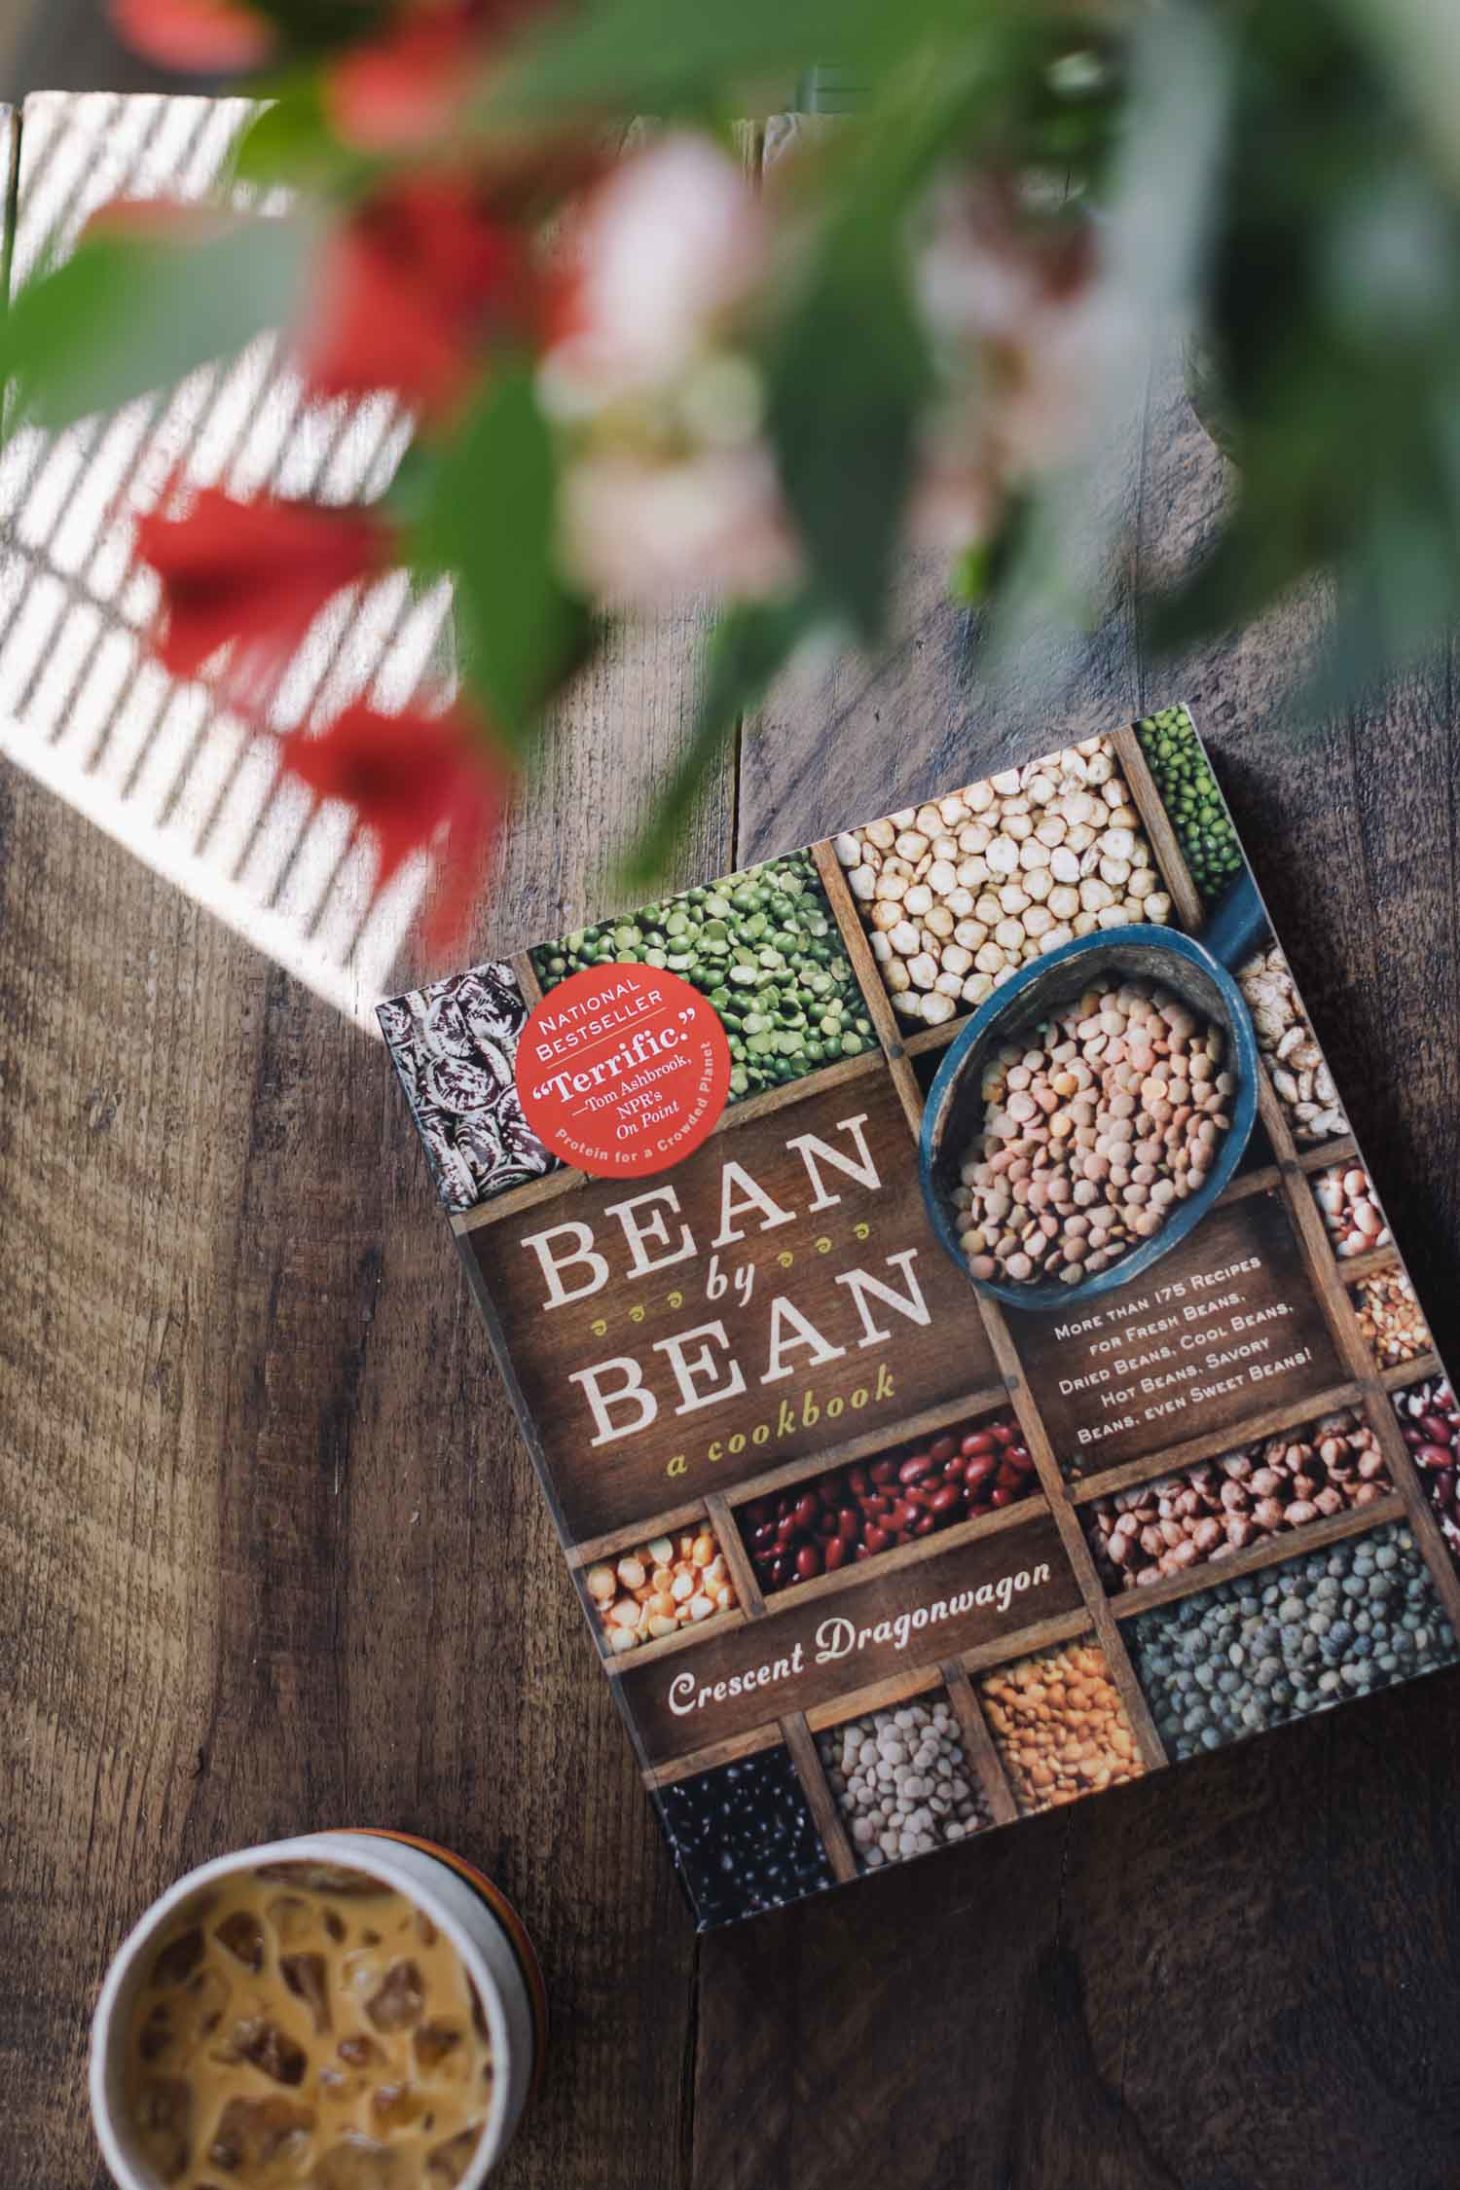 Bean By Bean: A Cookbook: More than 175 Recipes for Fresh Beans, Dried Beans, Cool Beans, Hot Beans, Savory Beans, Even Sweet Beans by Crescent Dragonwagon